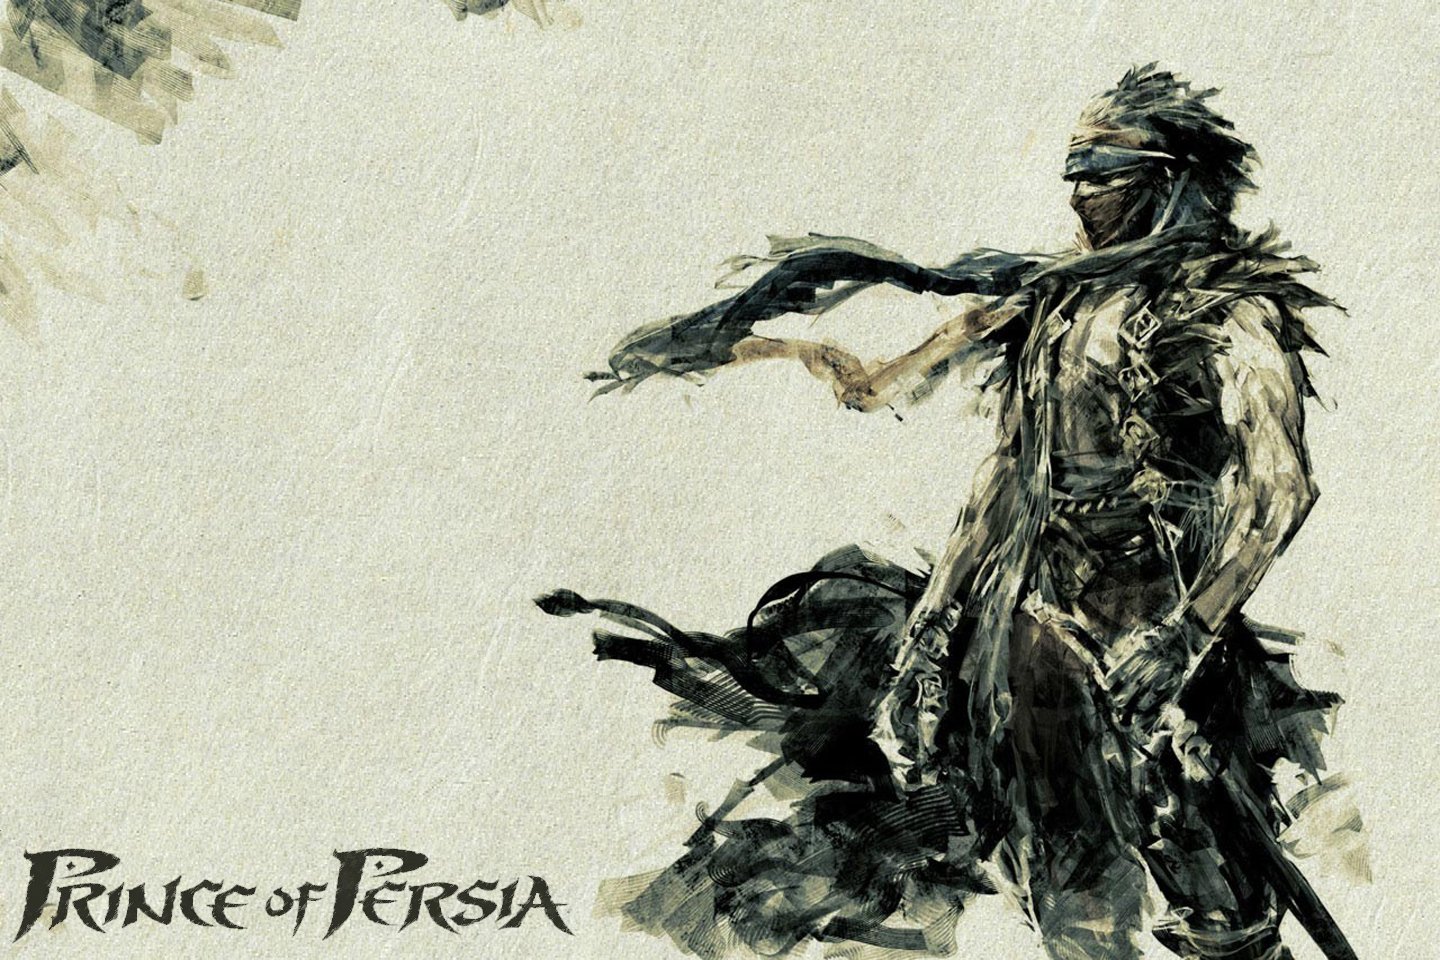 Prince of Persia wallpaper - Games wallpapers - Free wallpapers ...